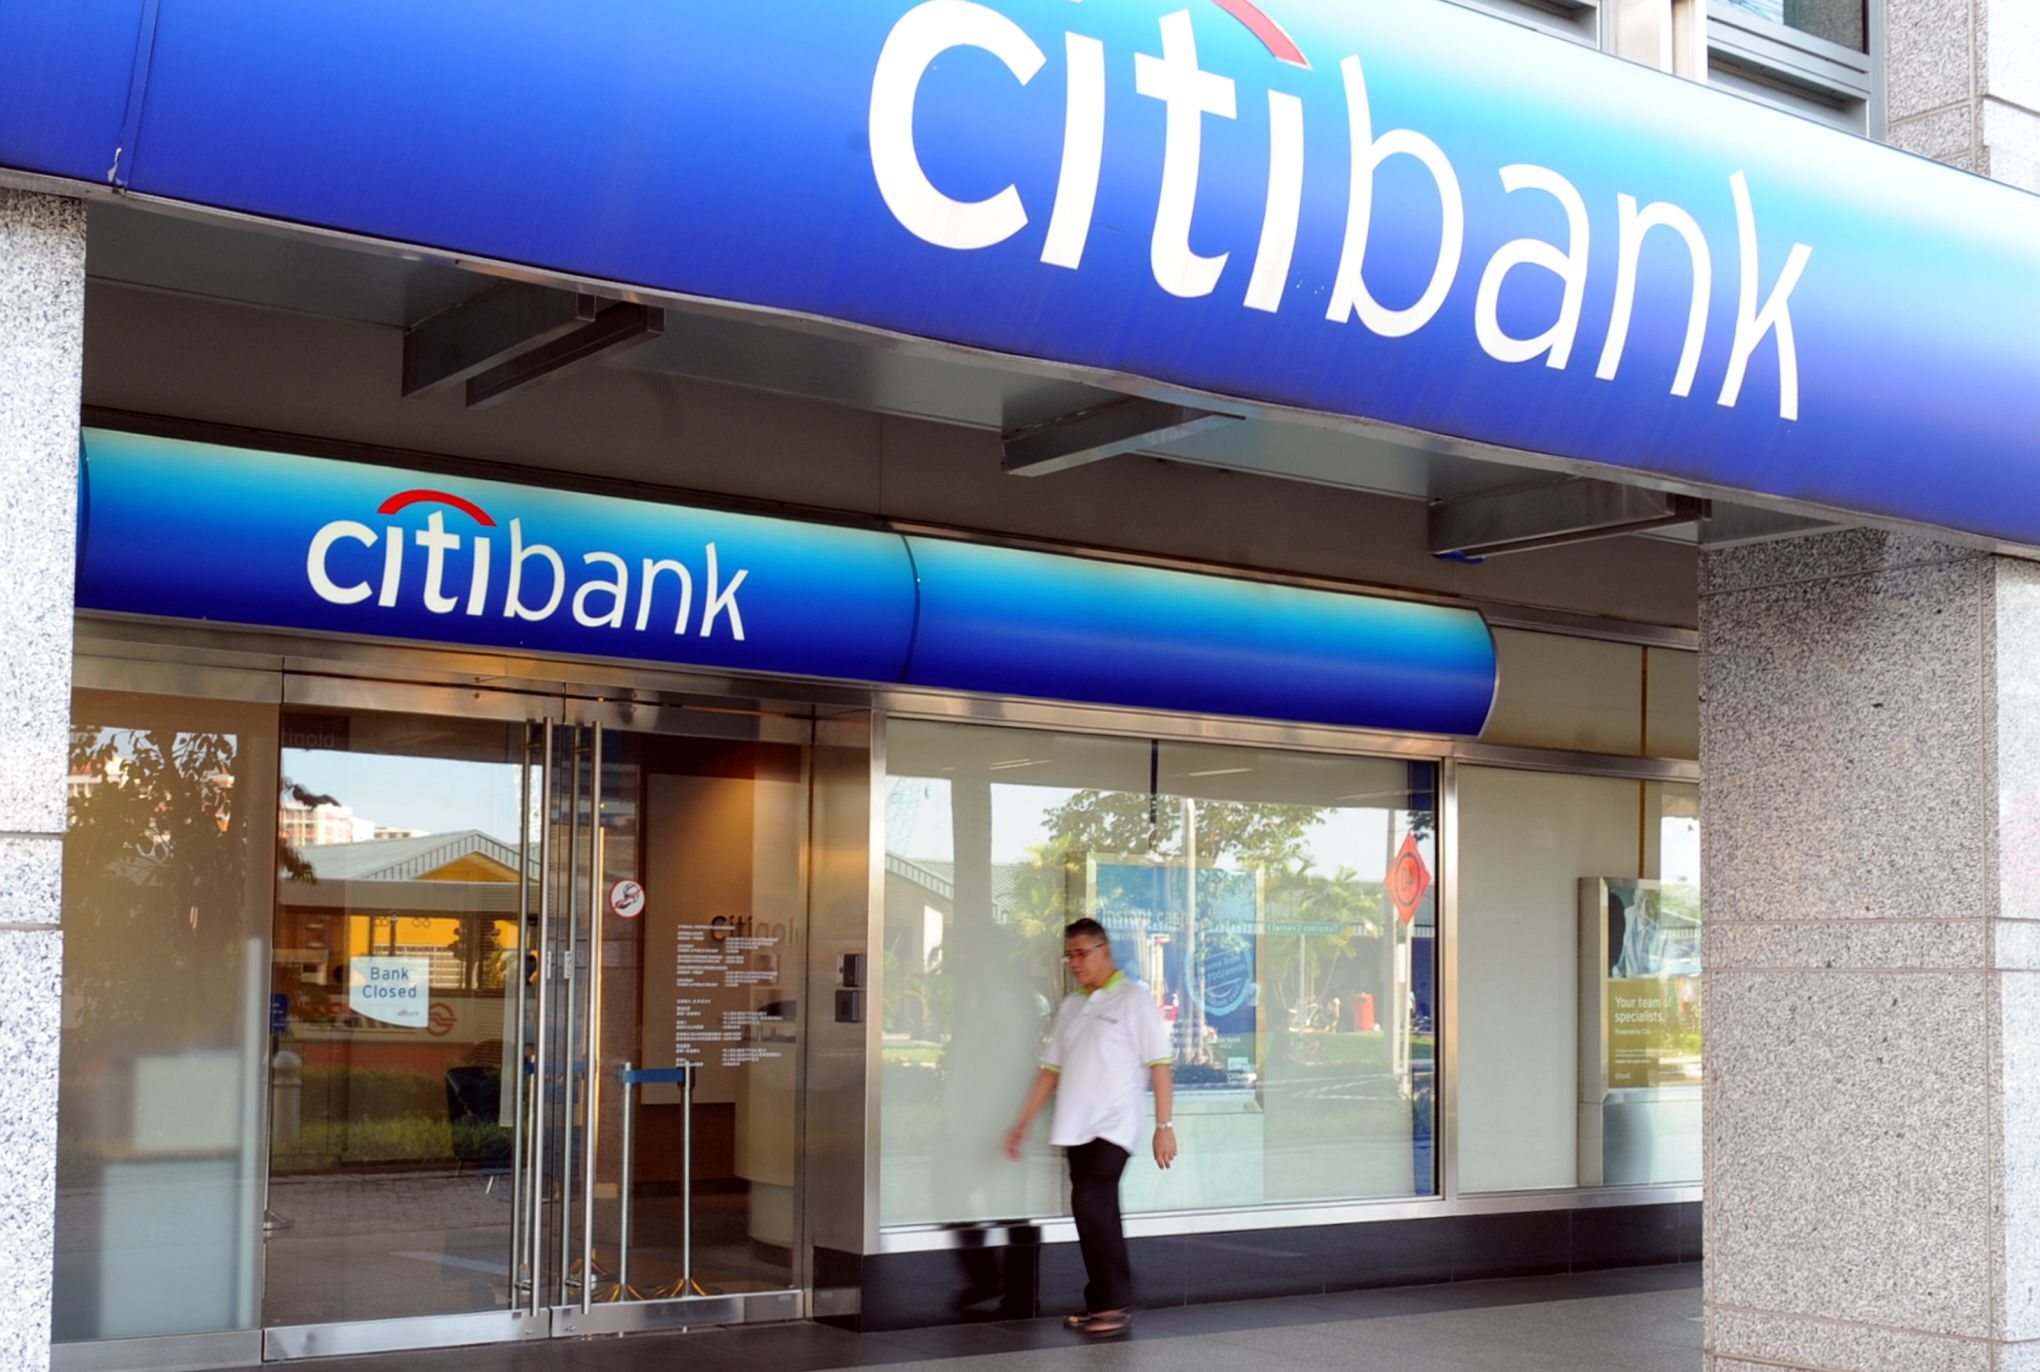 what is citi bank a global or us bank